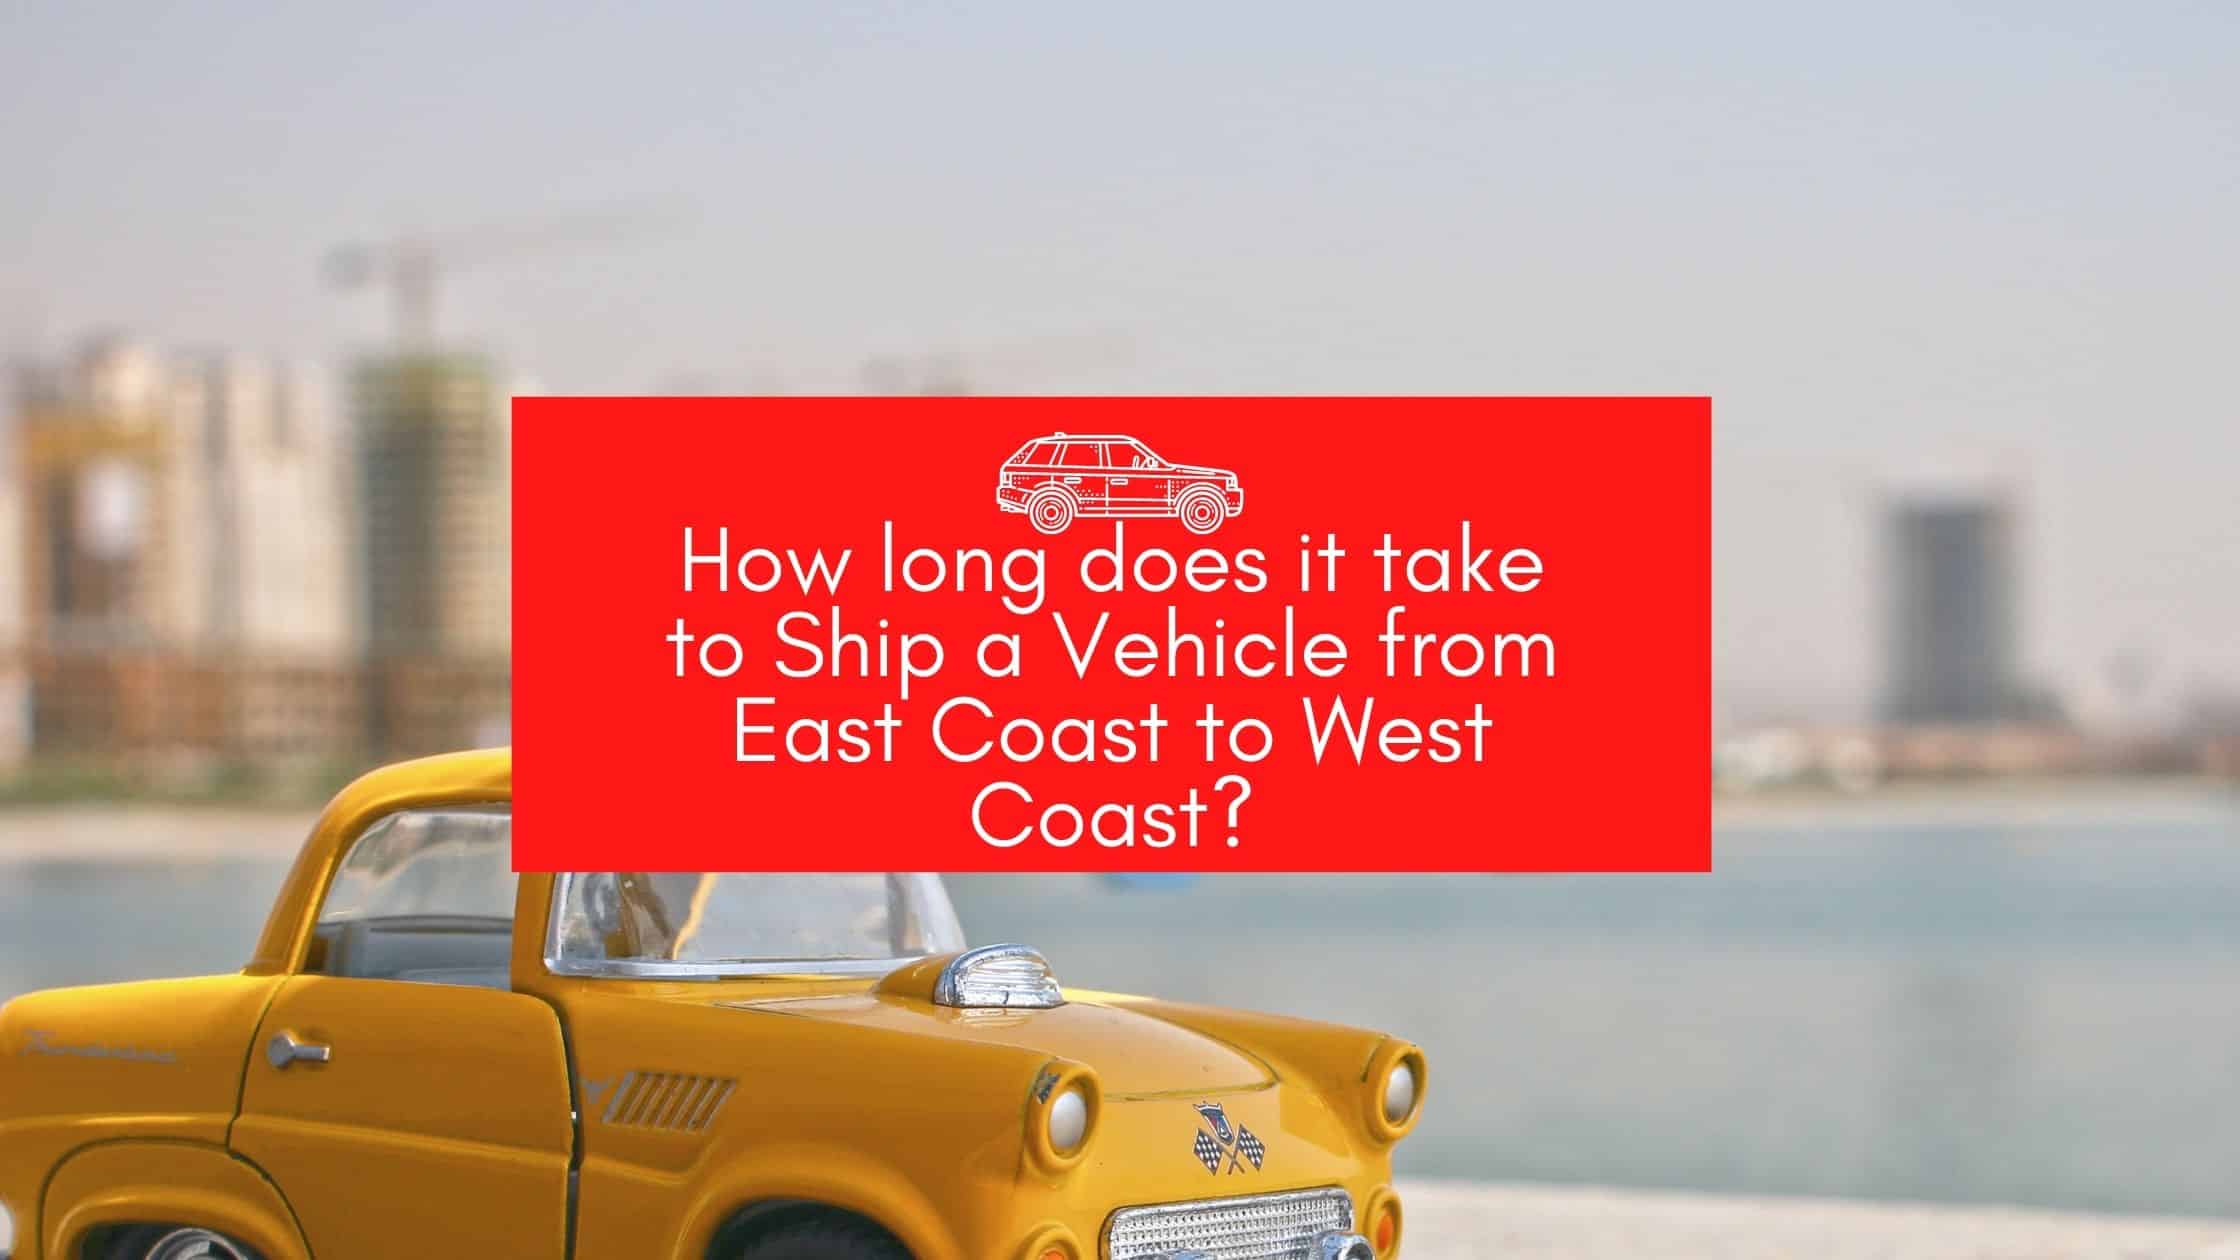 How long does it take to Ship a Vehicle from East Coast to West Coast?